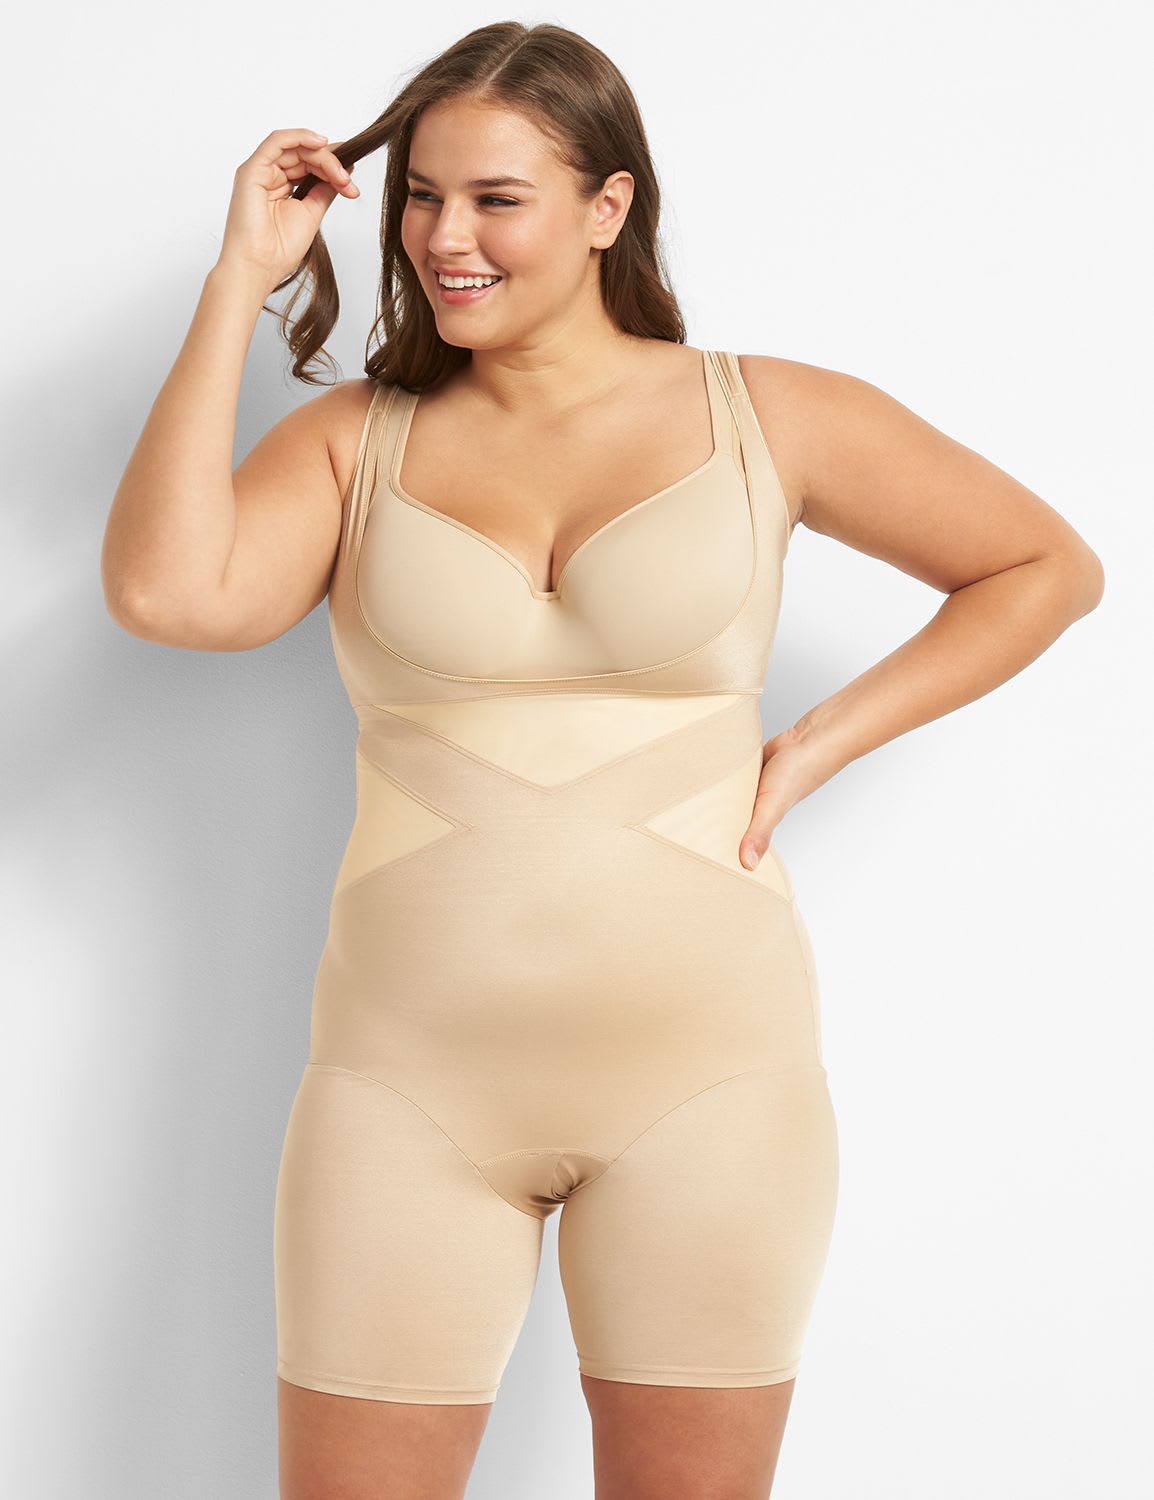 Shapewear & Fajas The Best Faja Fresh and Light Body Shaper thong Slimming  Bodysuit Define your Waistline Strapless Seamless Technology Gusset Opening  with Hooks Anti-slip Grip Lining Natural Shape o 